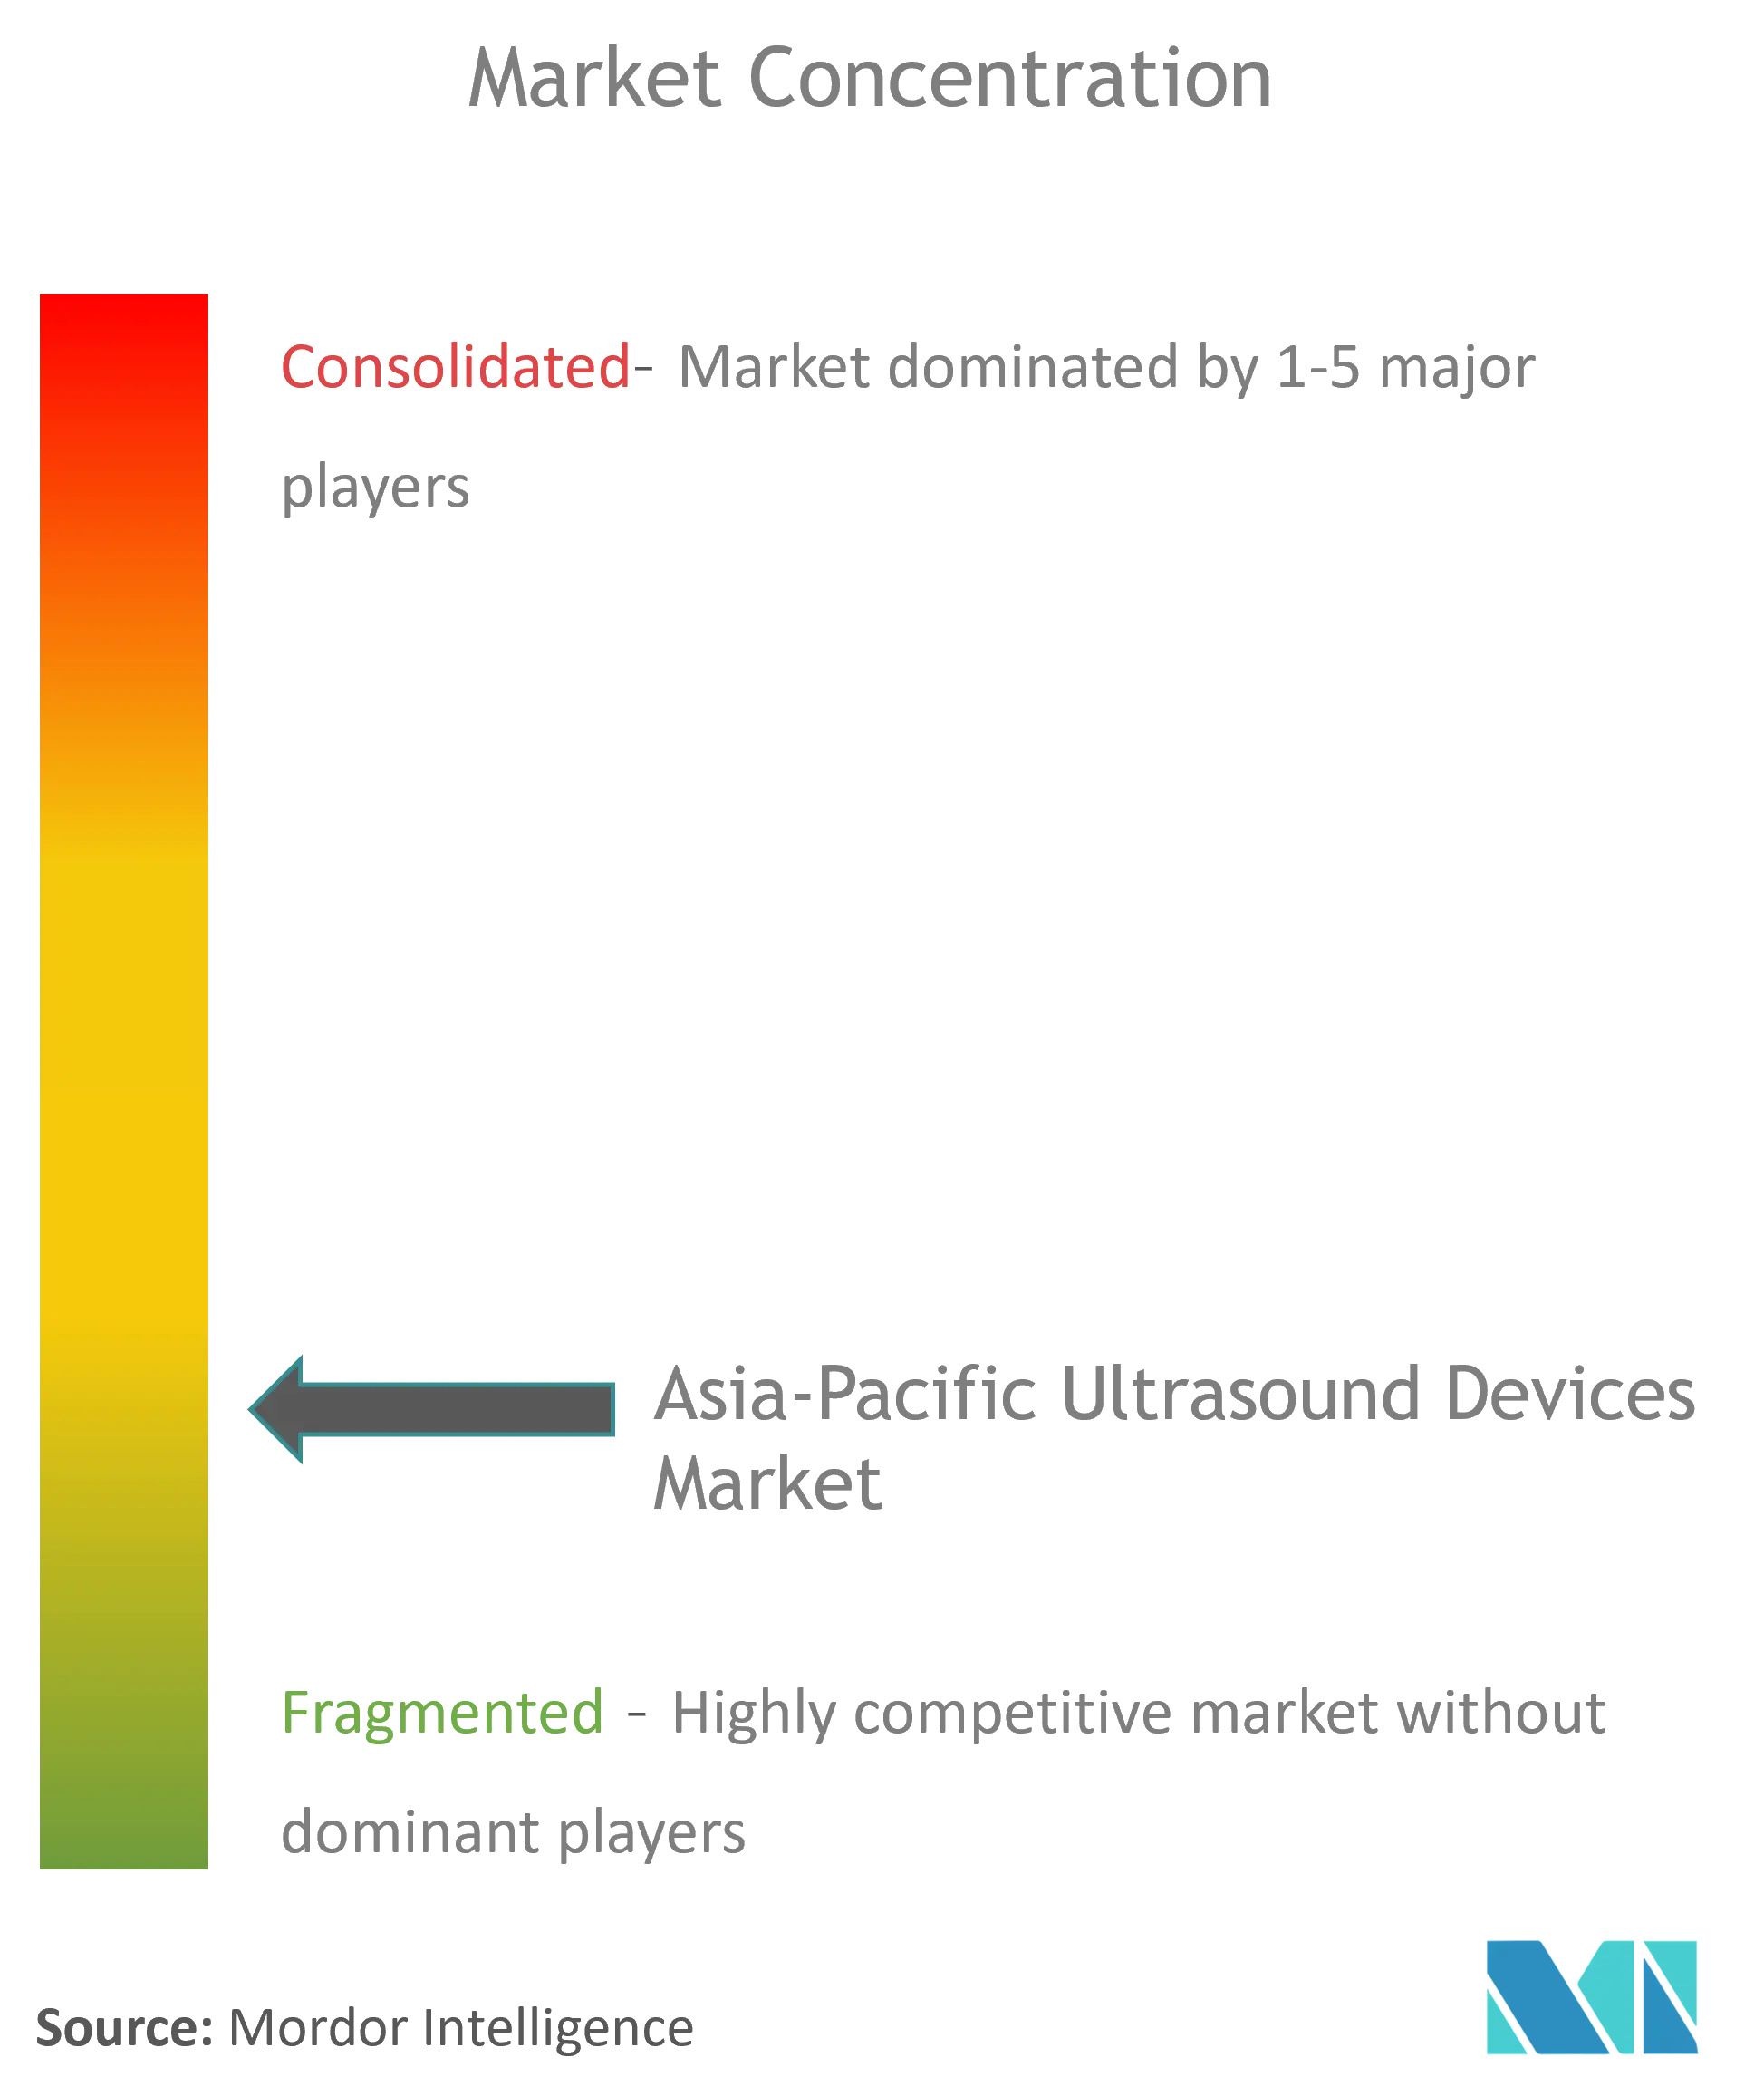 Asia-Pacific Ultrasound Devices Market Concentration